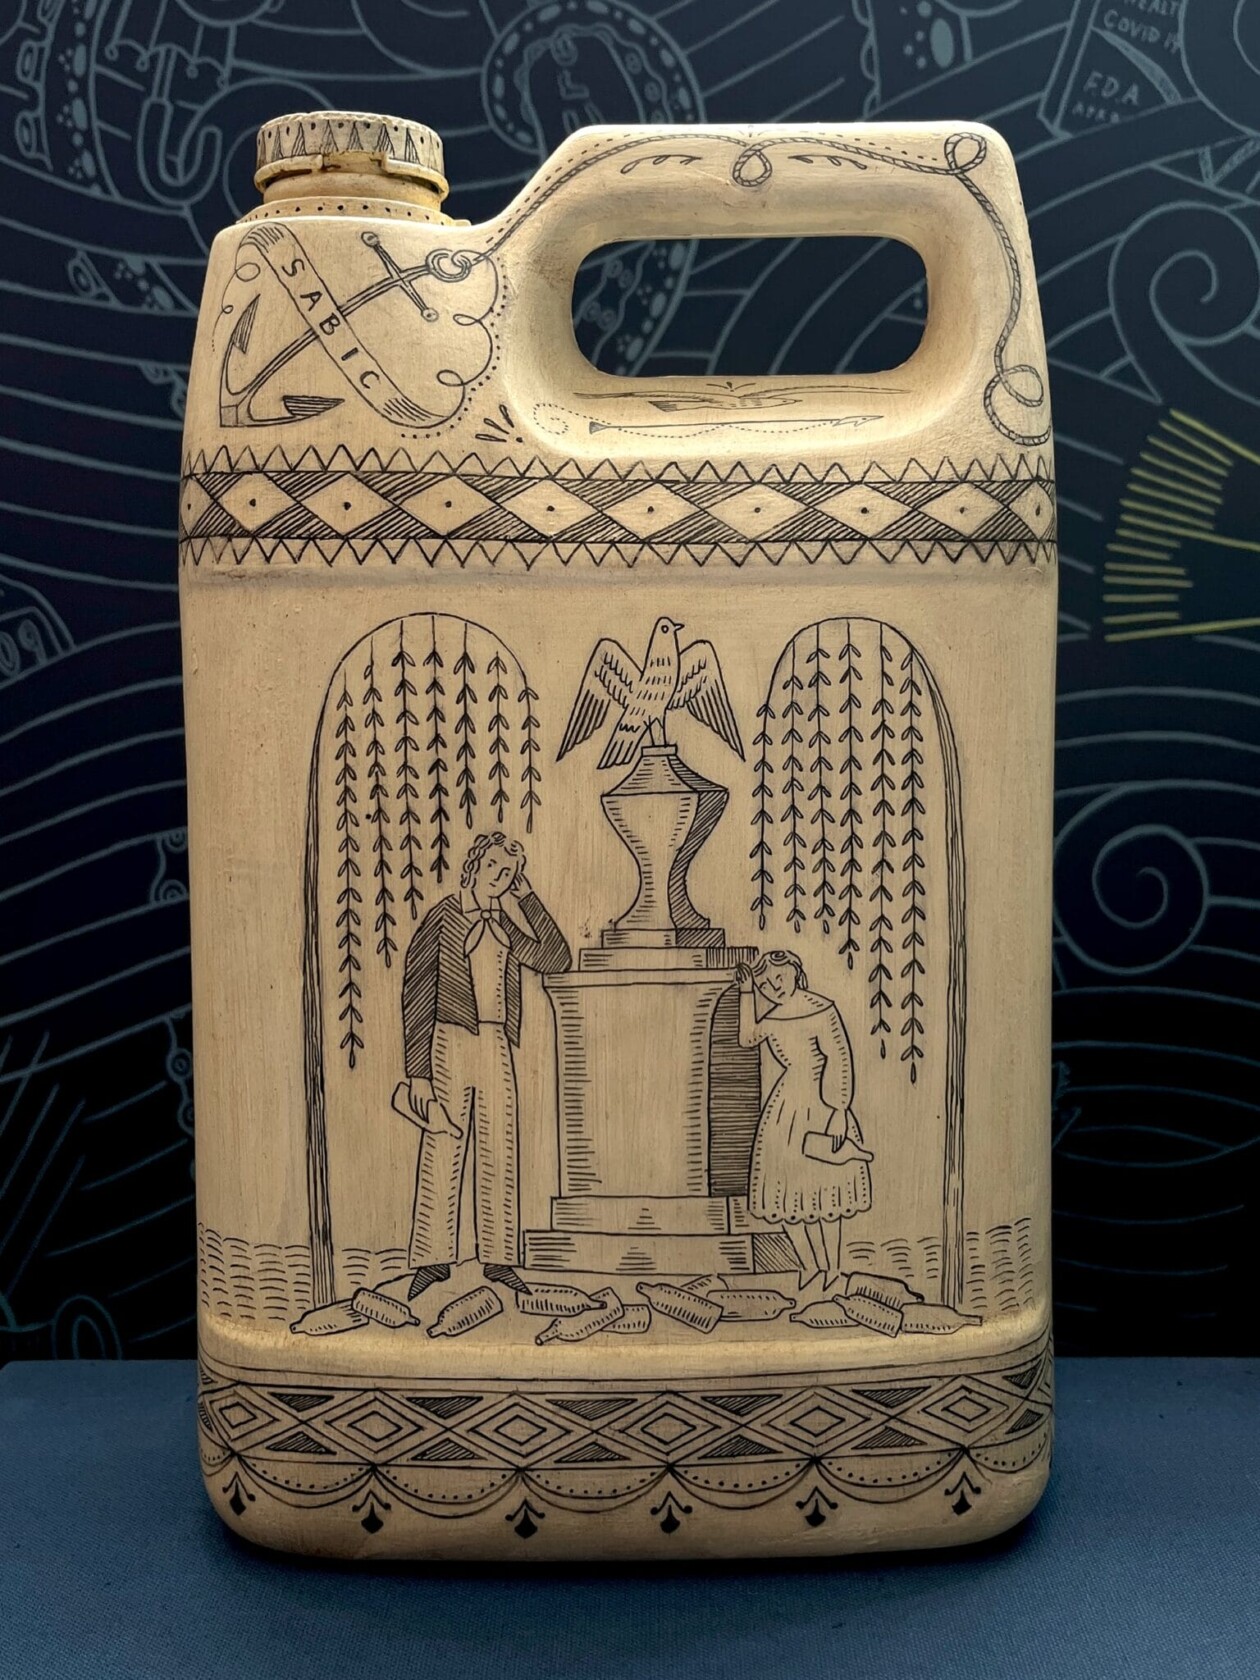 Plastic Scrimshaw, Carving Environmental Allegories On Discarded Waste, By Duke Riley (13)